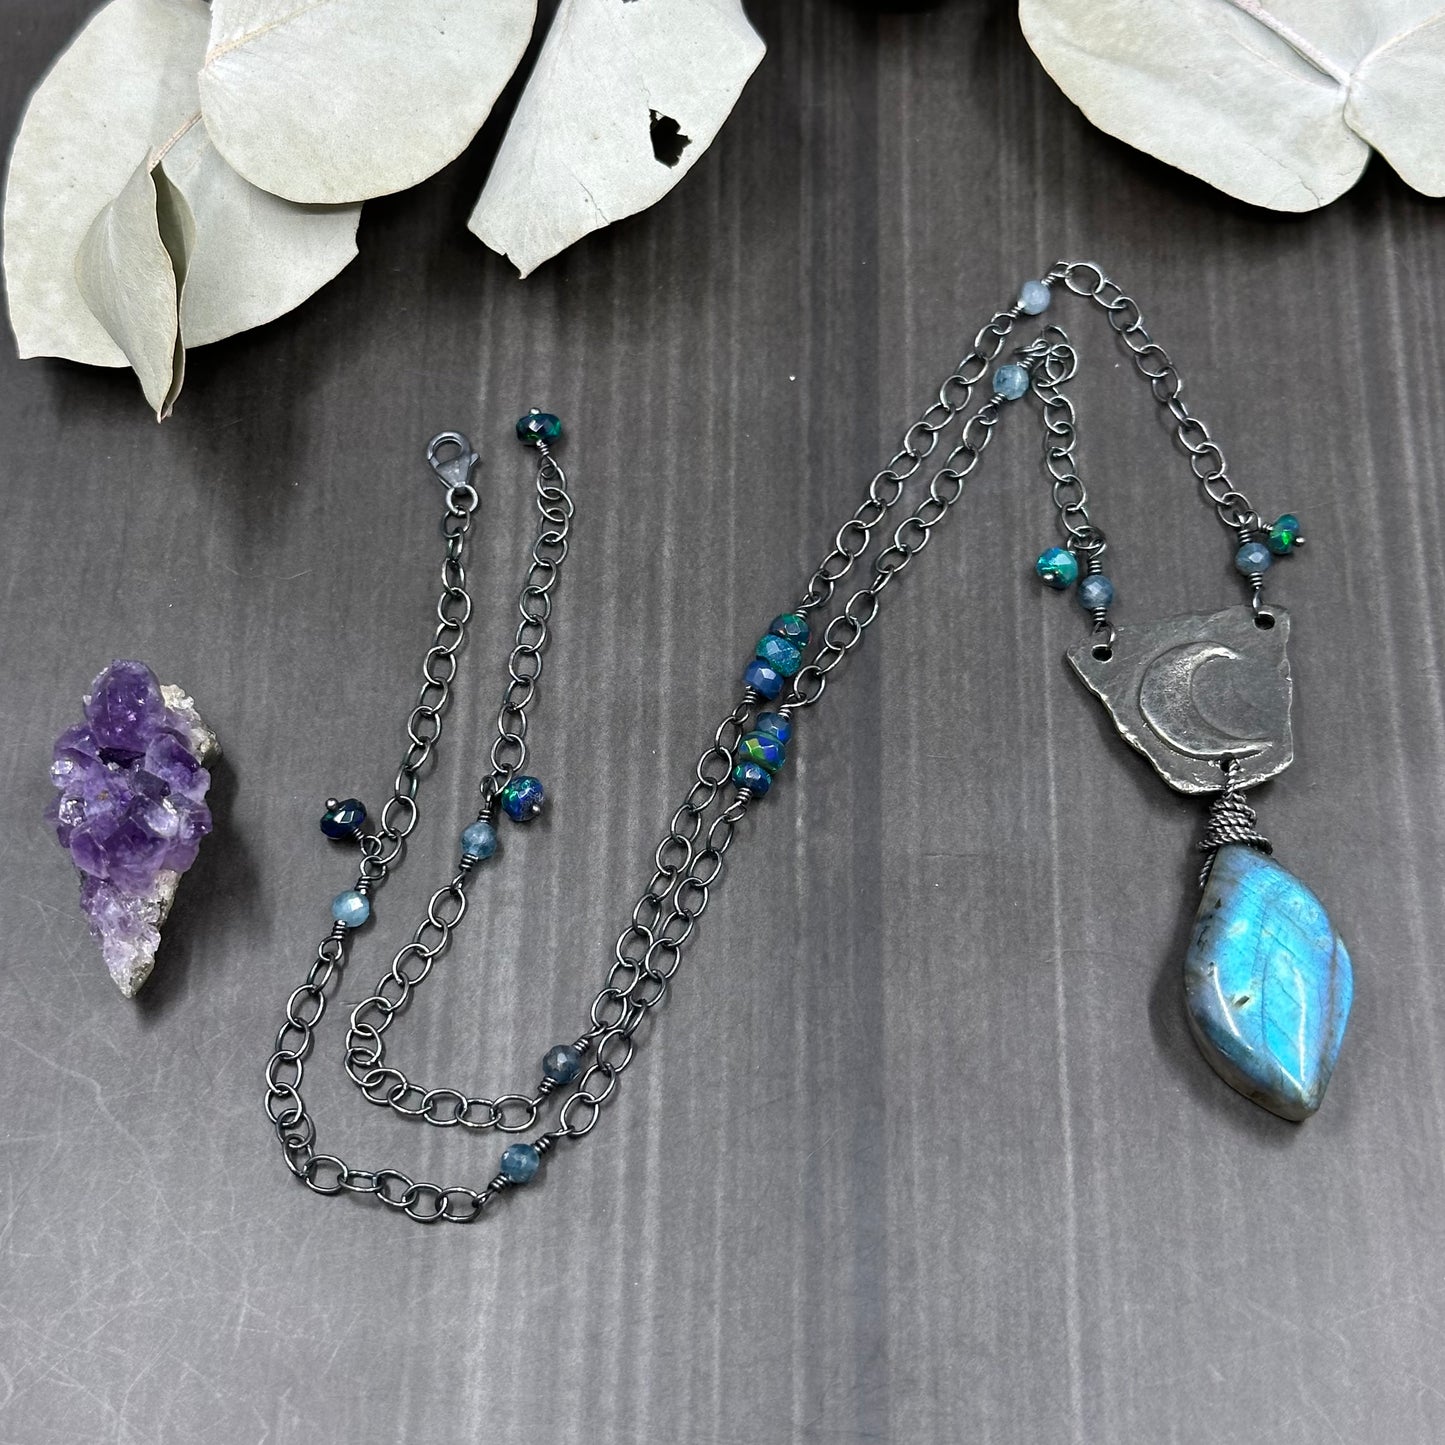 Sterling silver, labradorite, opal, and pewter necklace